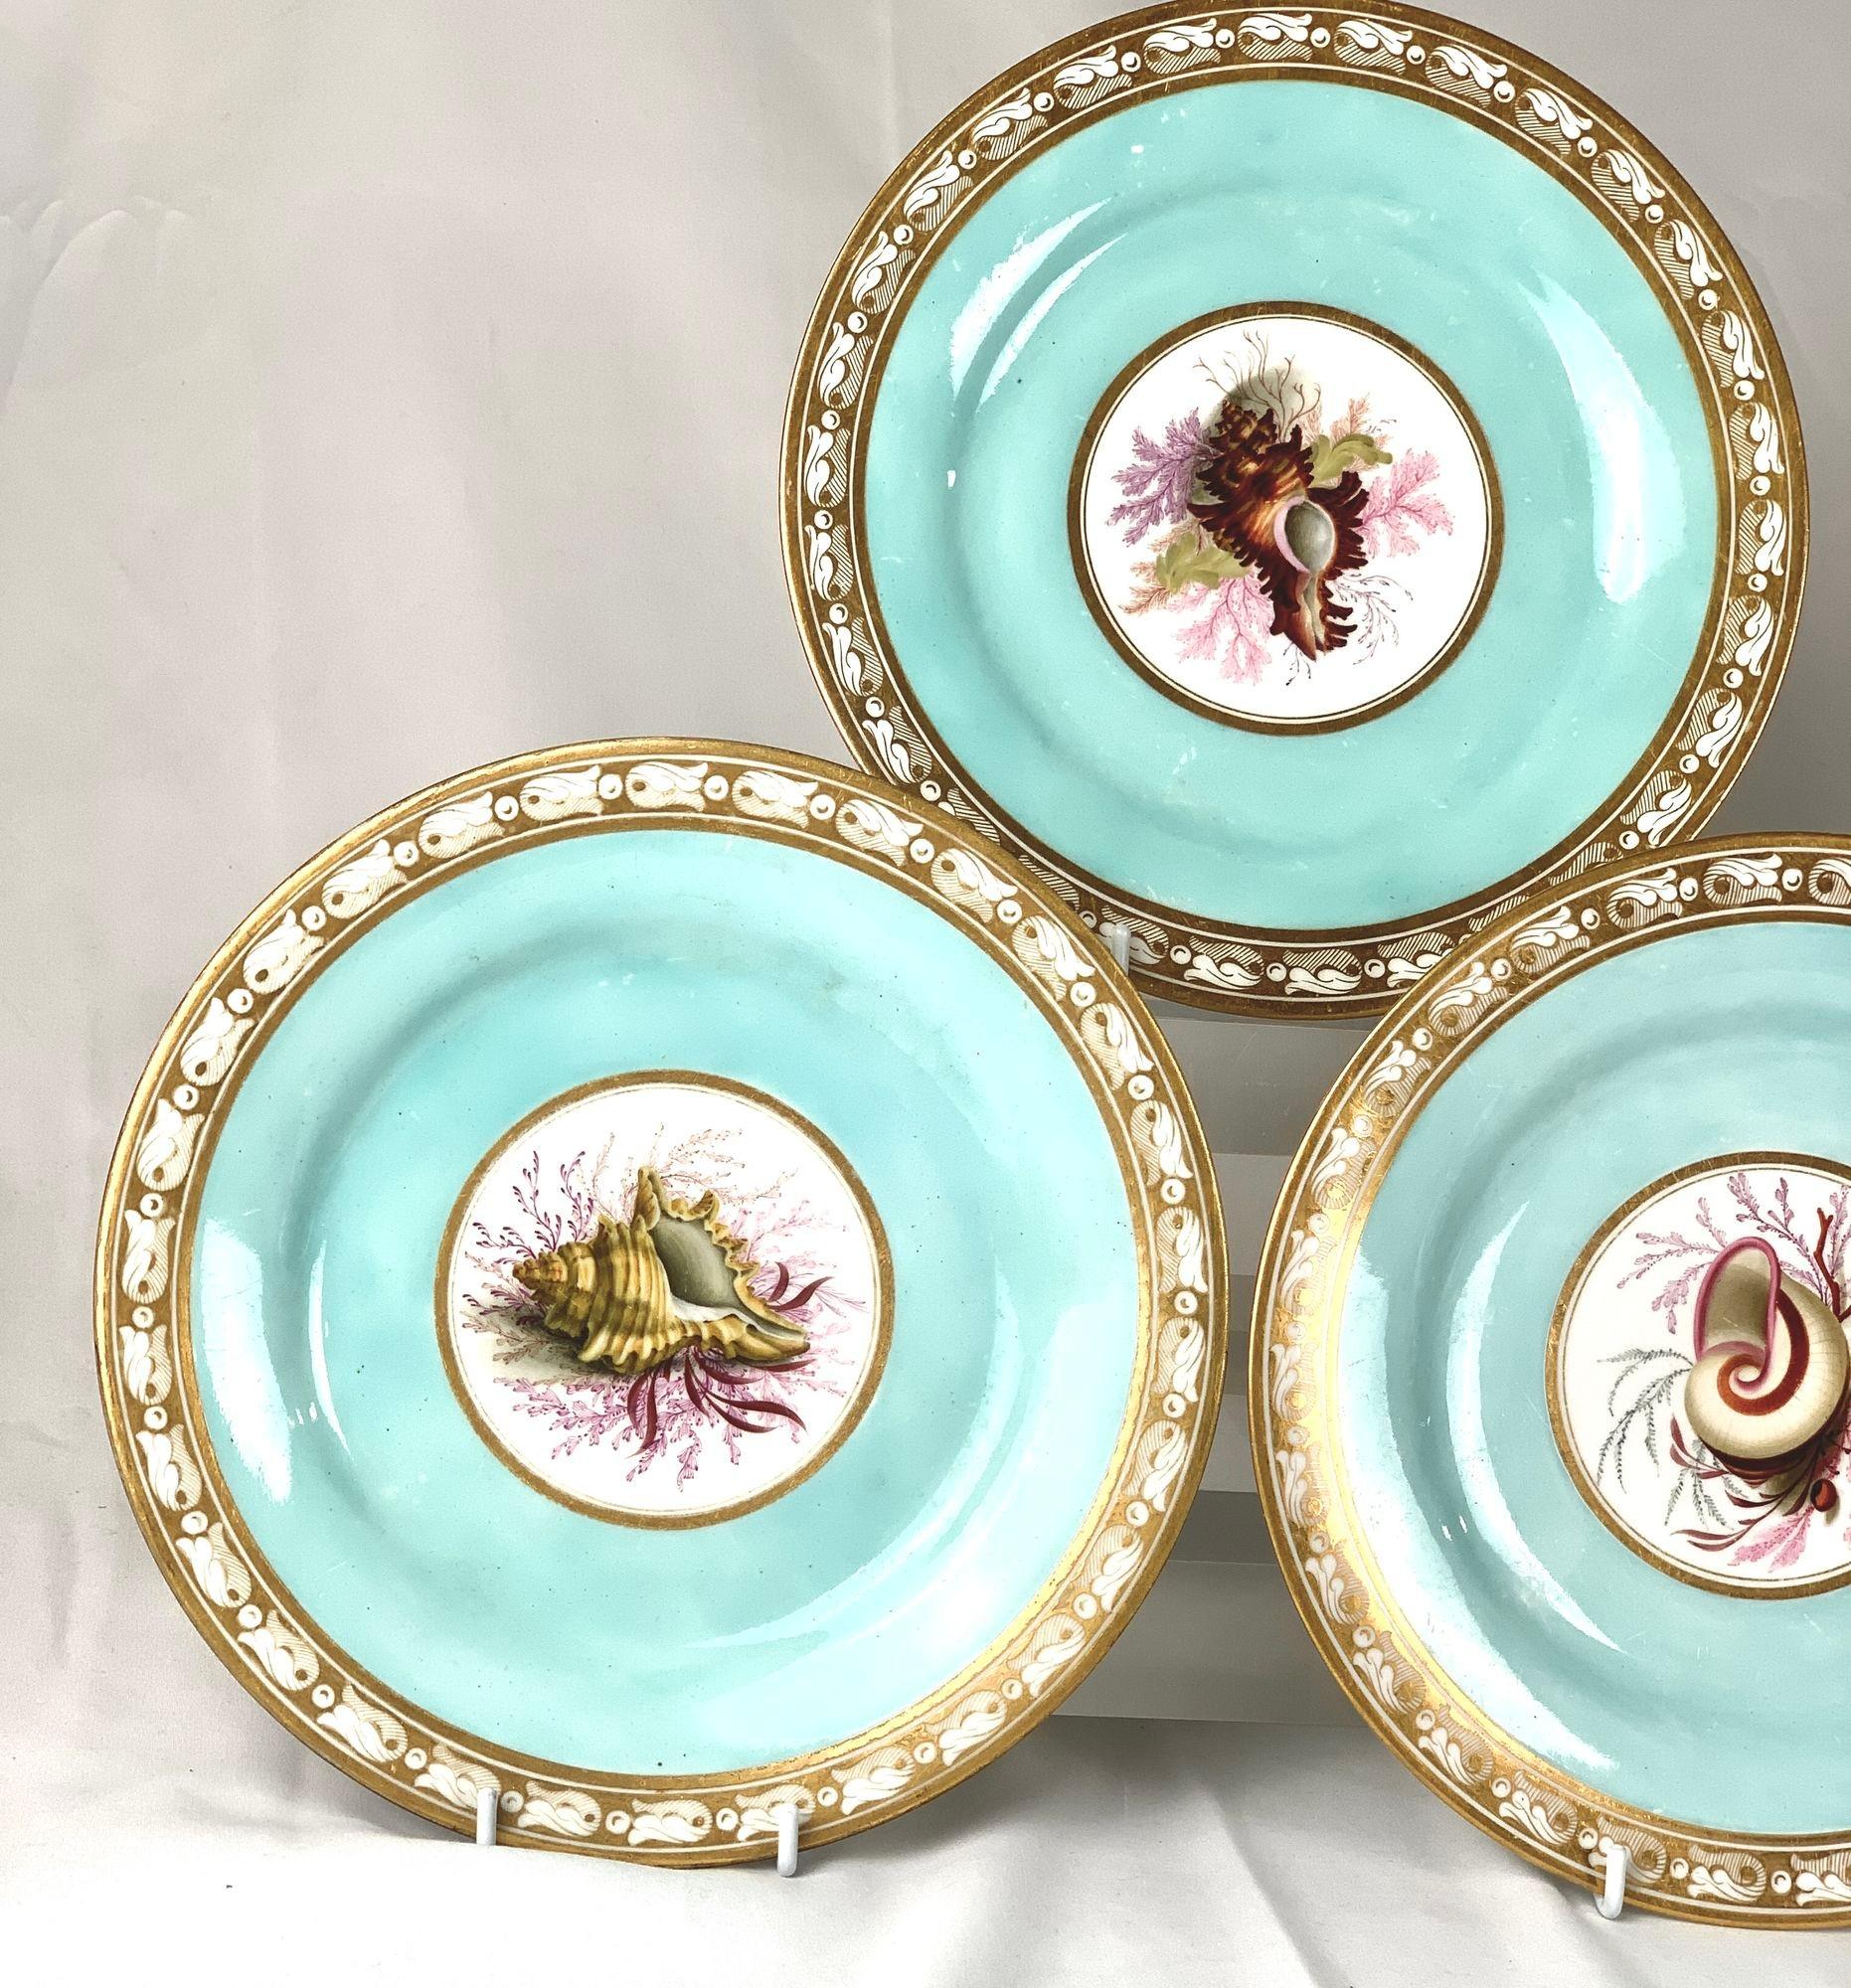 Hand-Painted Hand Painted Shell Decorated Worcester Plates Set of 5 Flight Barr Barr C-1820 For Sale